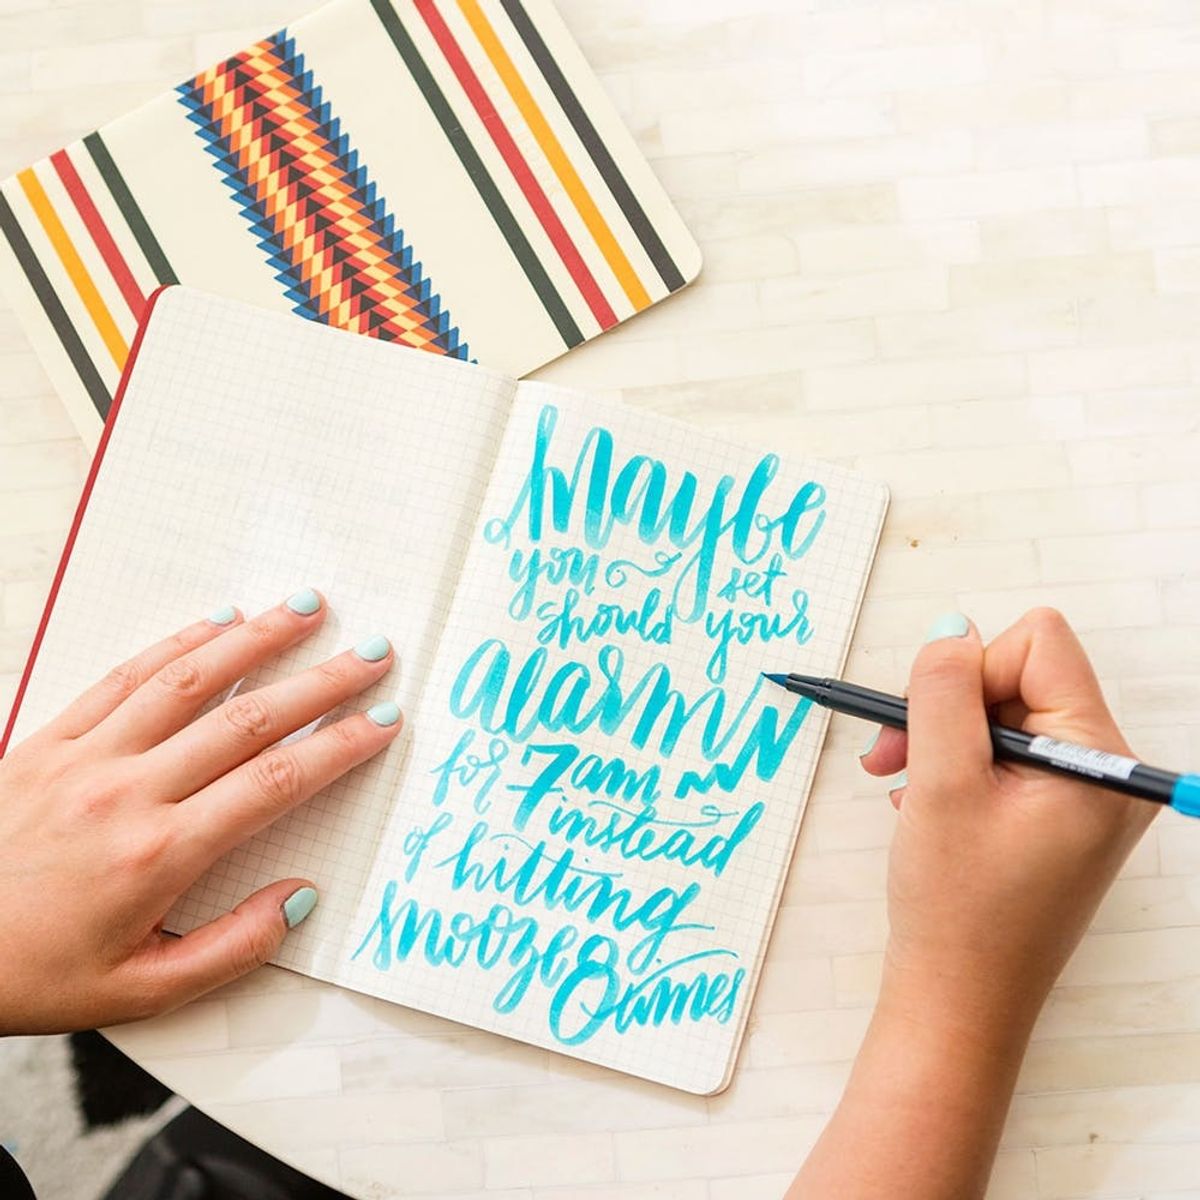 Here’s What Happened When Millennials Put Pen to Paper for a Week